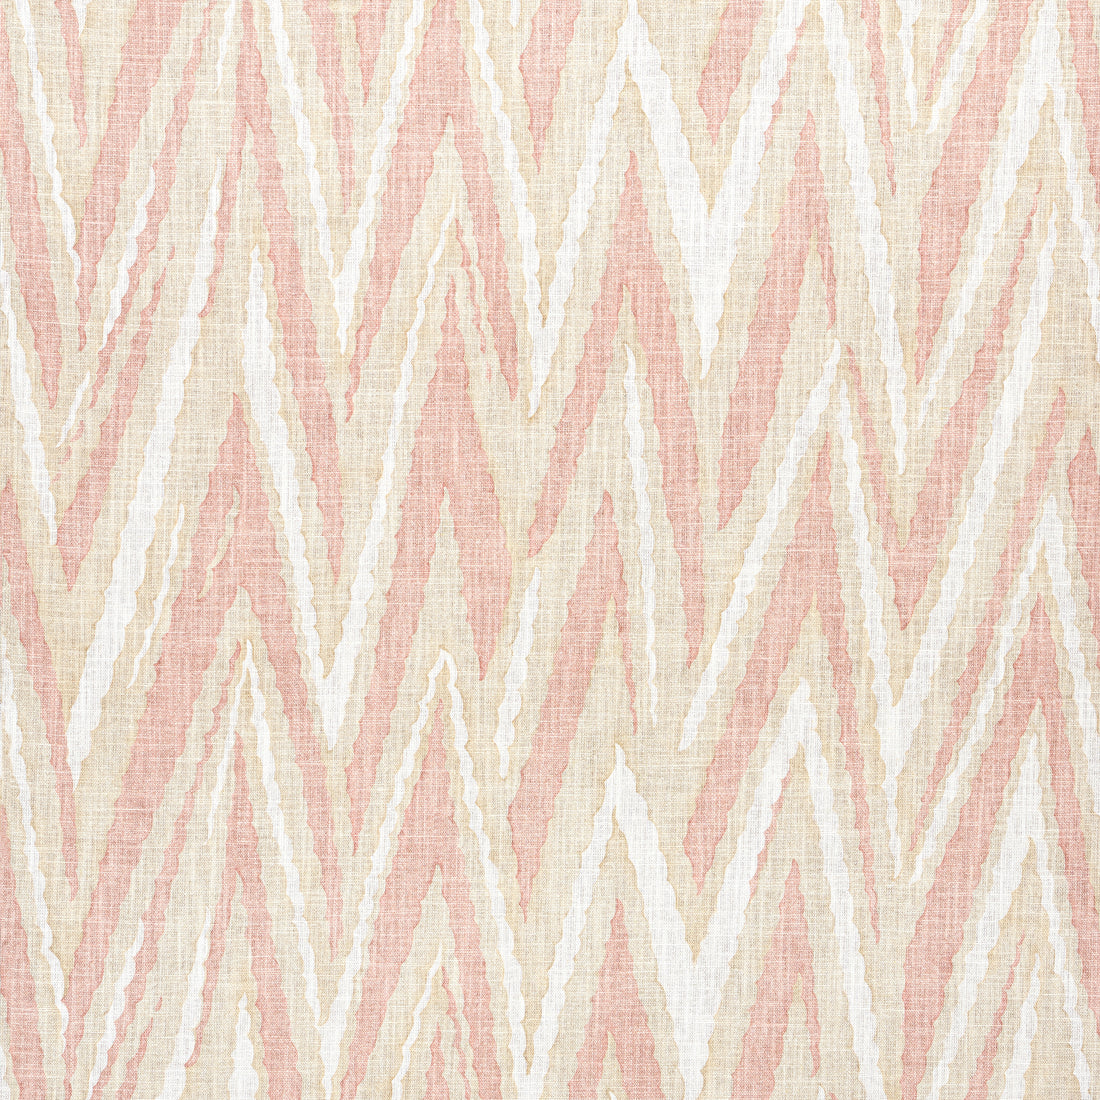 Highland Peak fabric in blush color - pattern number AF23142 - by Anna French in the Willow Tree collection